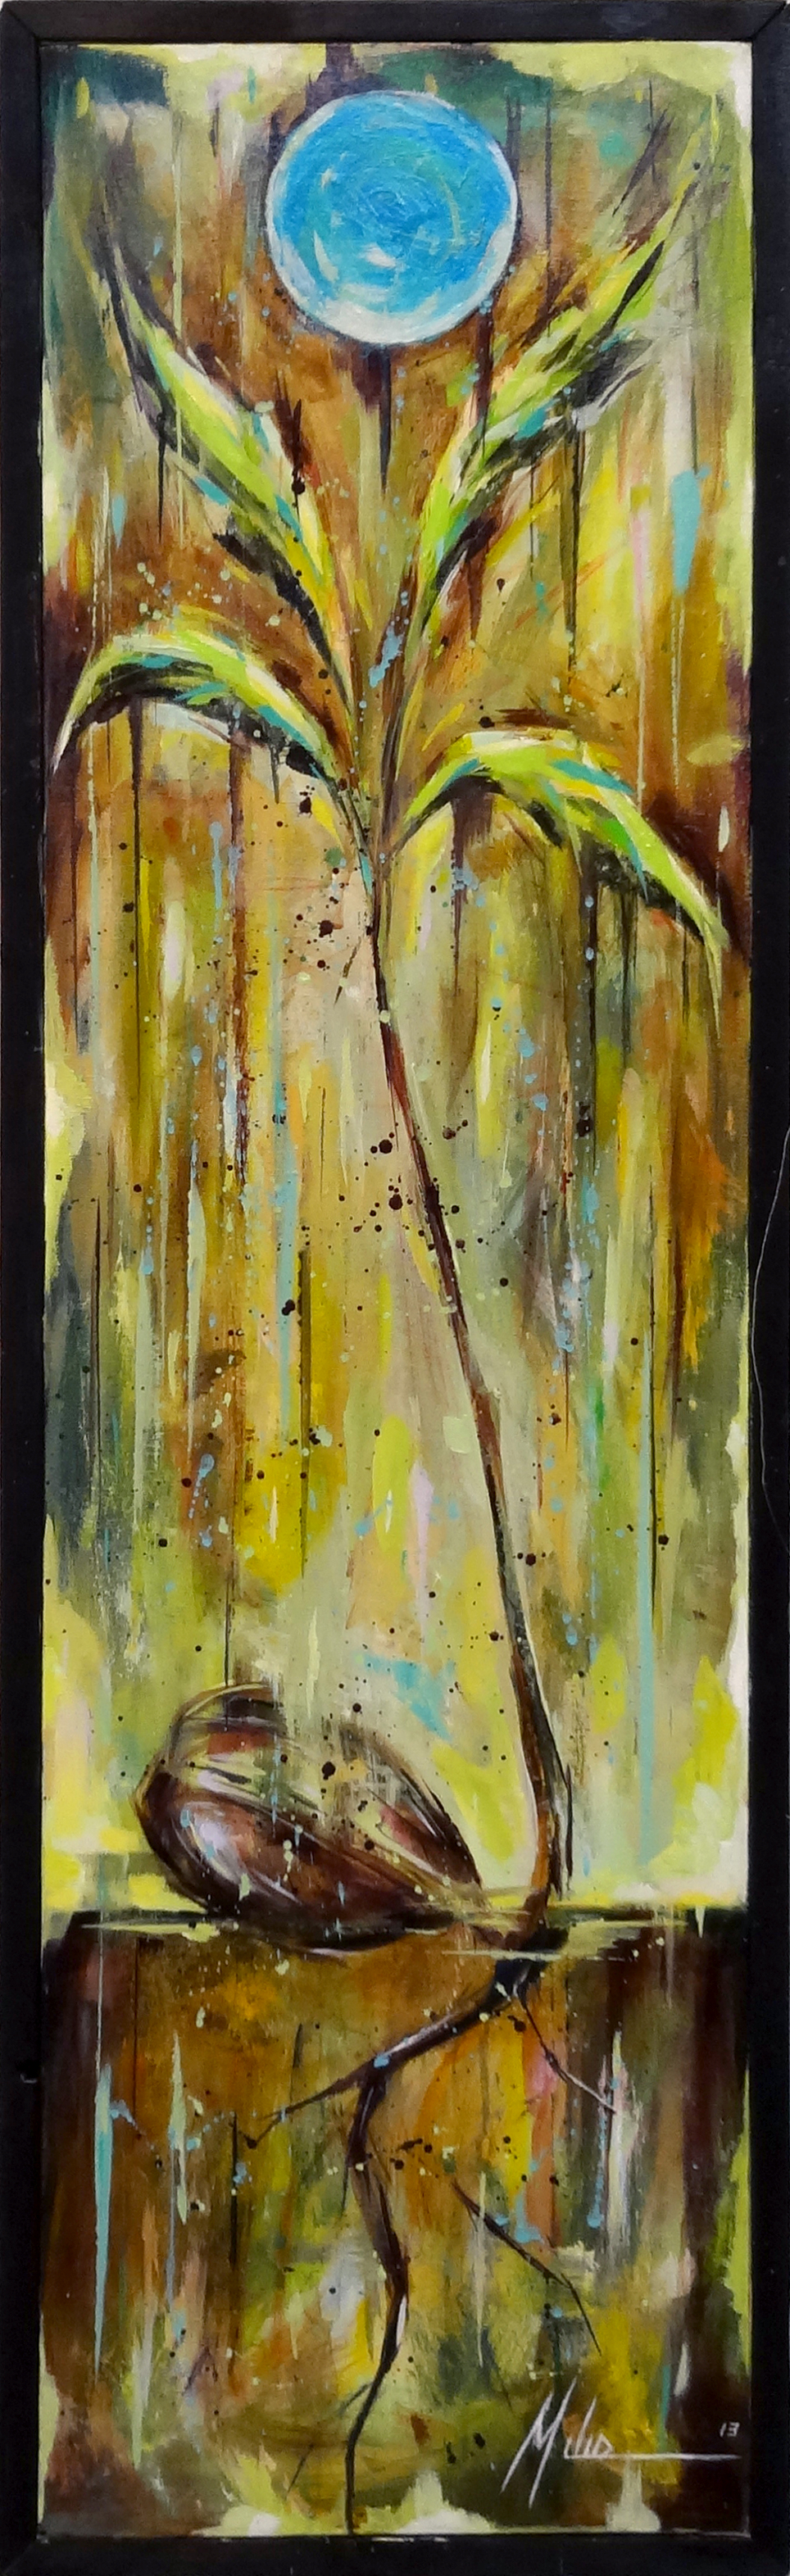  Sprout  acrylic on canvas  12” x 42”  2013 